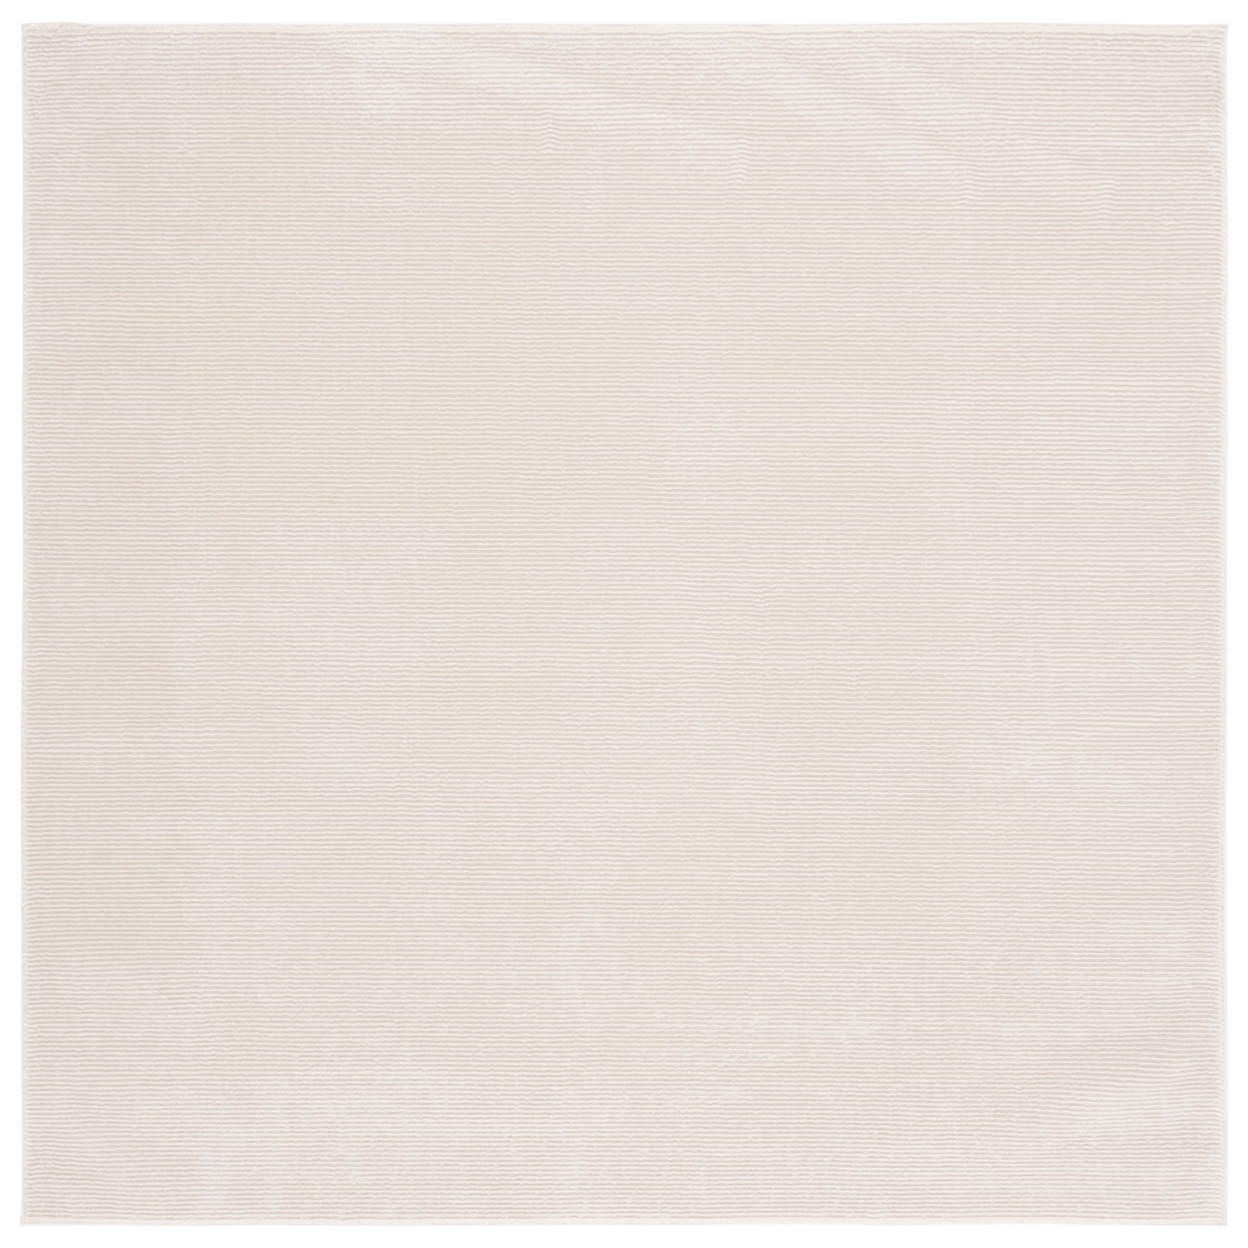 SAFAVIEH REV102A Revive Ivory - Taupe, 5'-3 X 7'-7 Rectangle